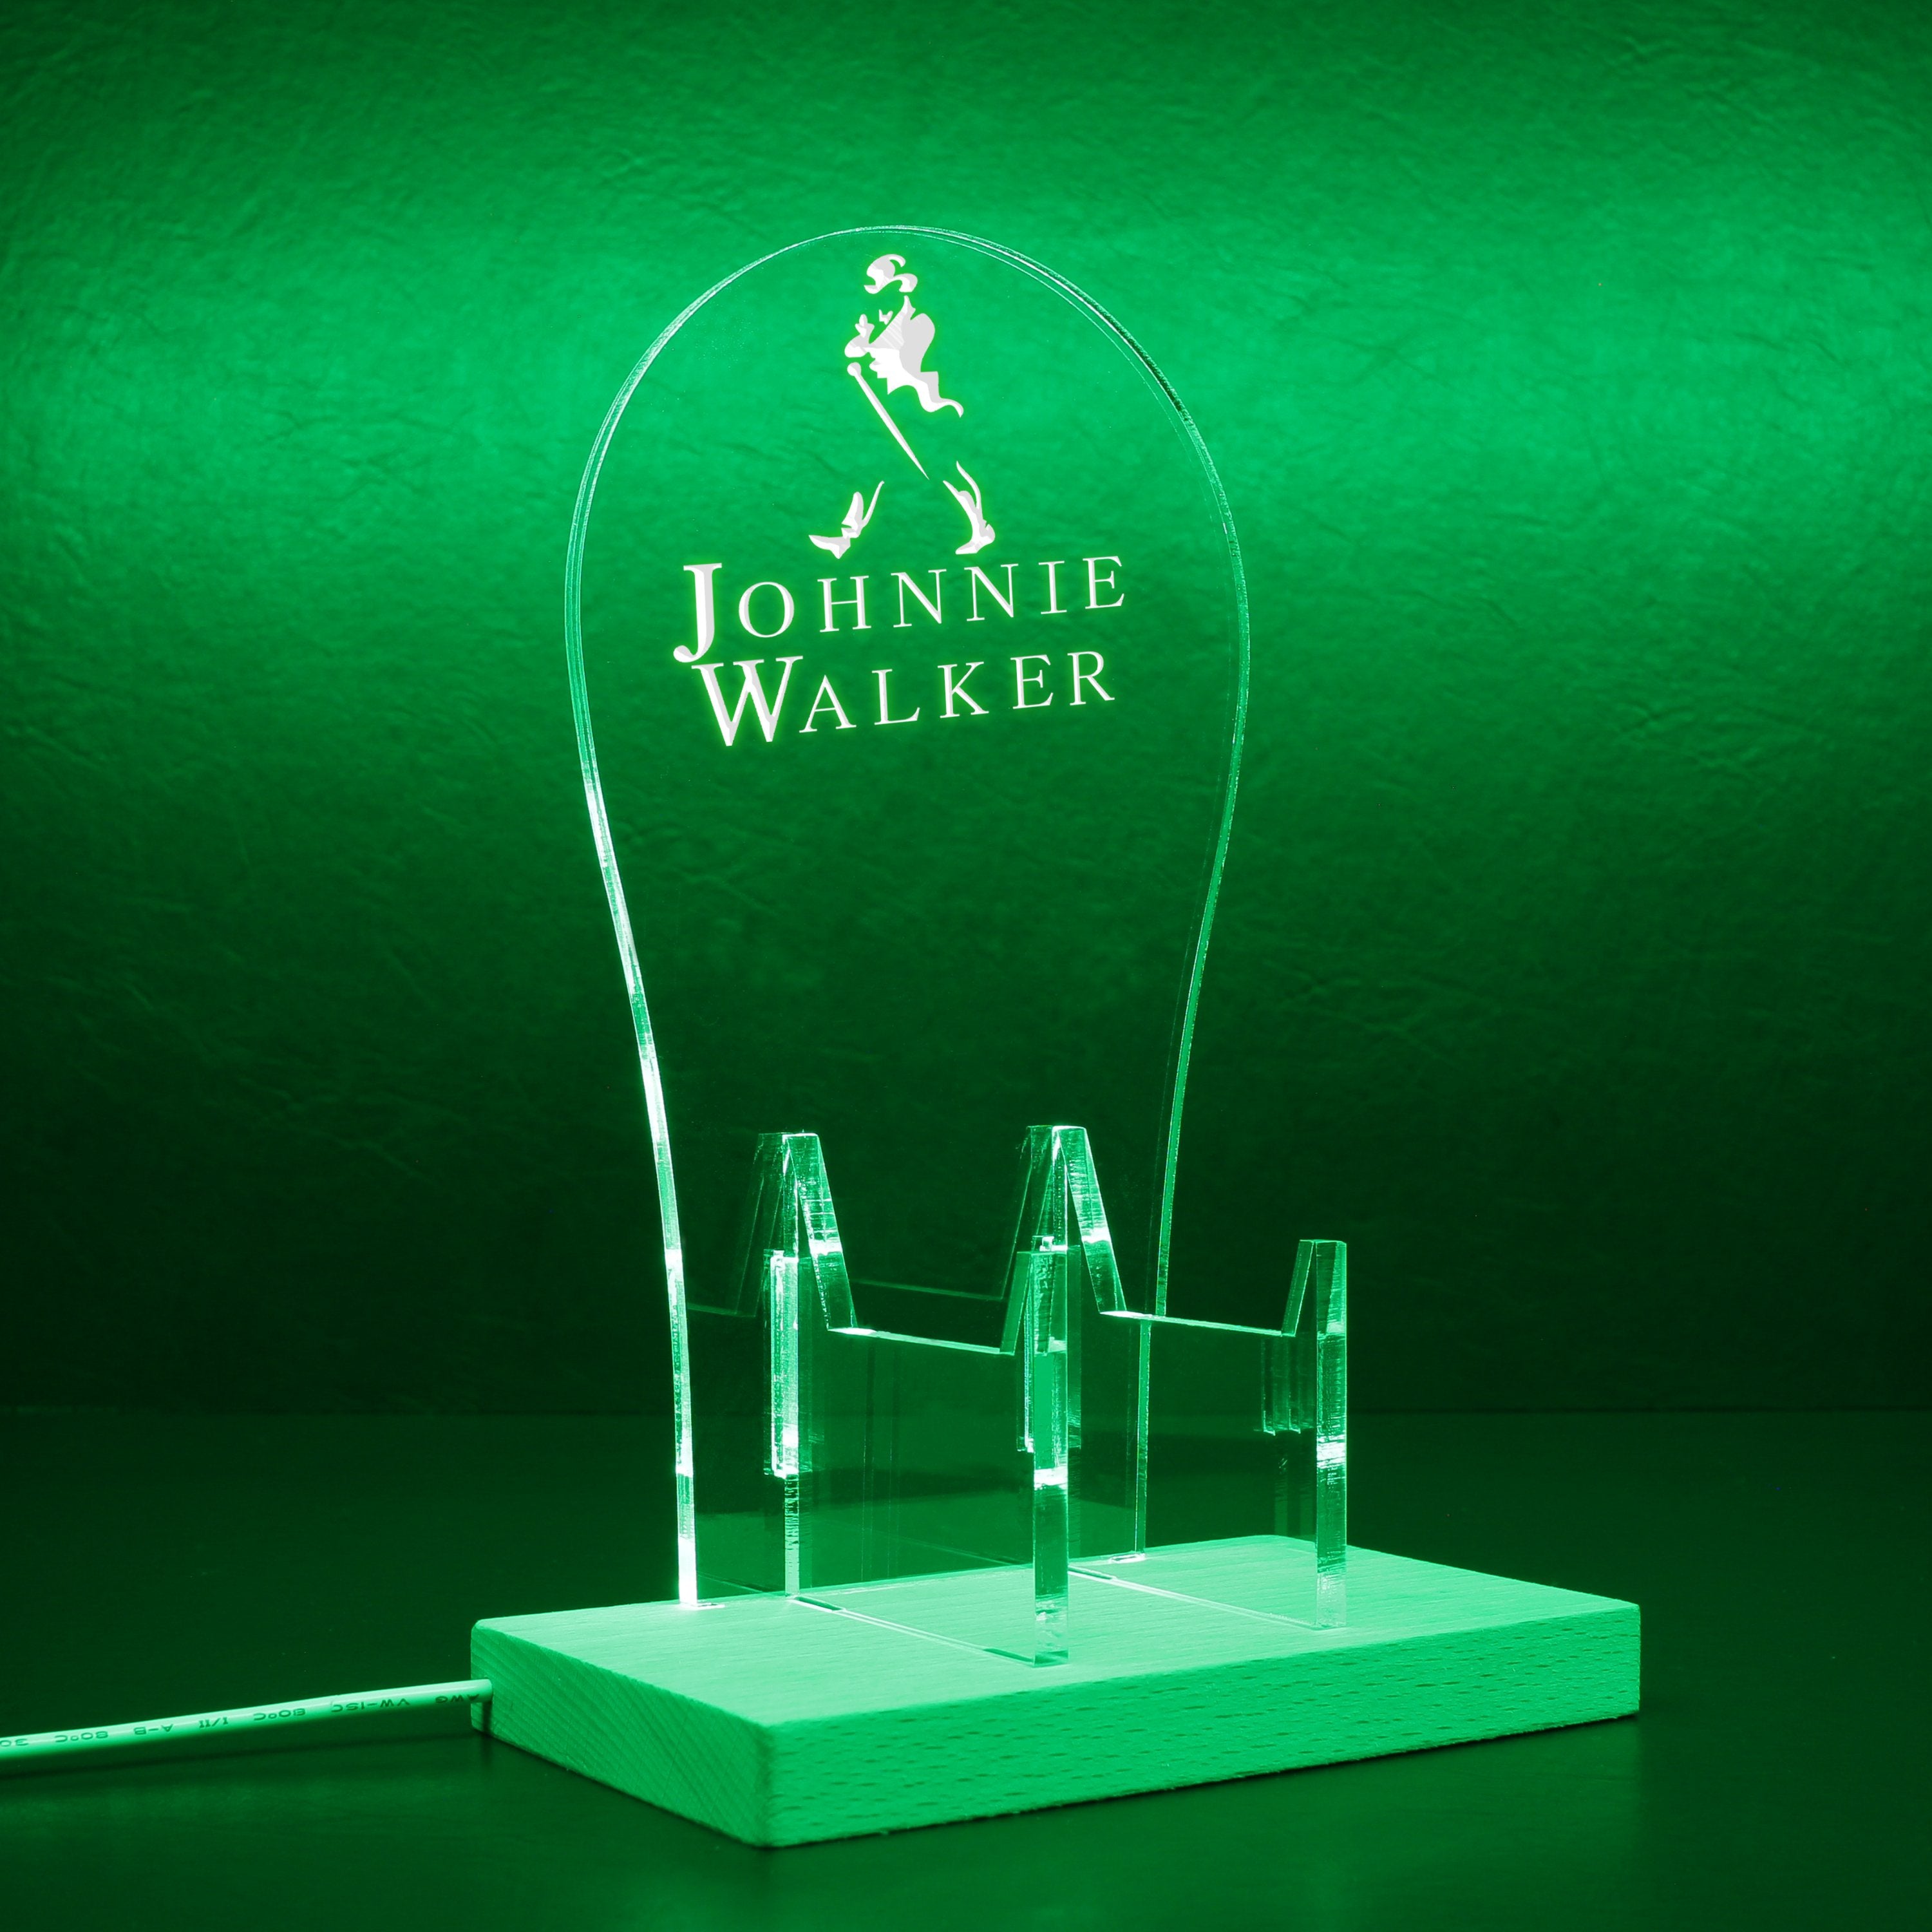 Johnnie Walker Wine RGB LED Gaming Headset Controller Stand